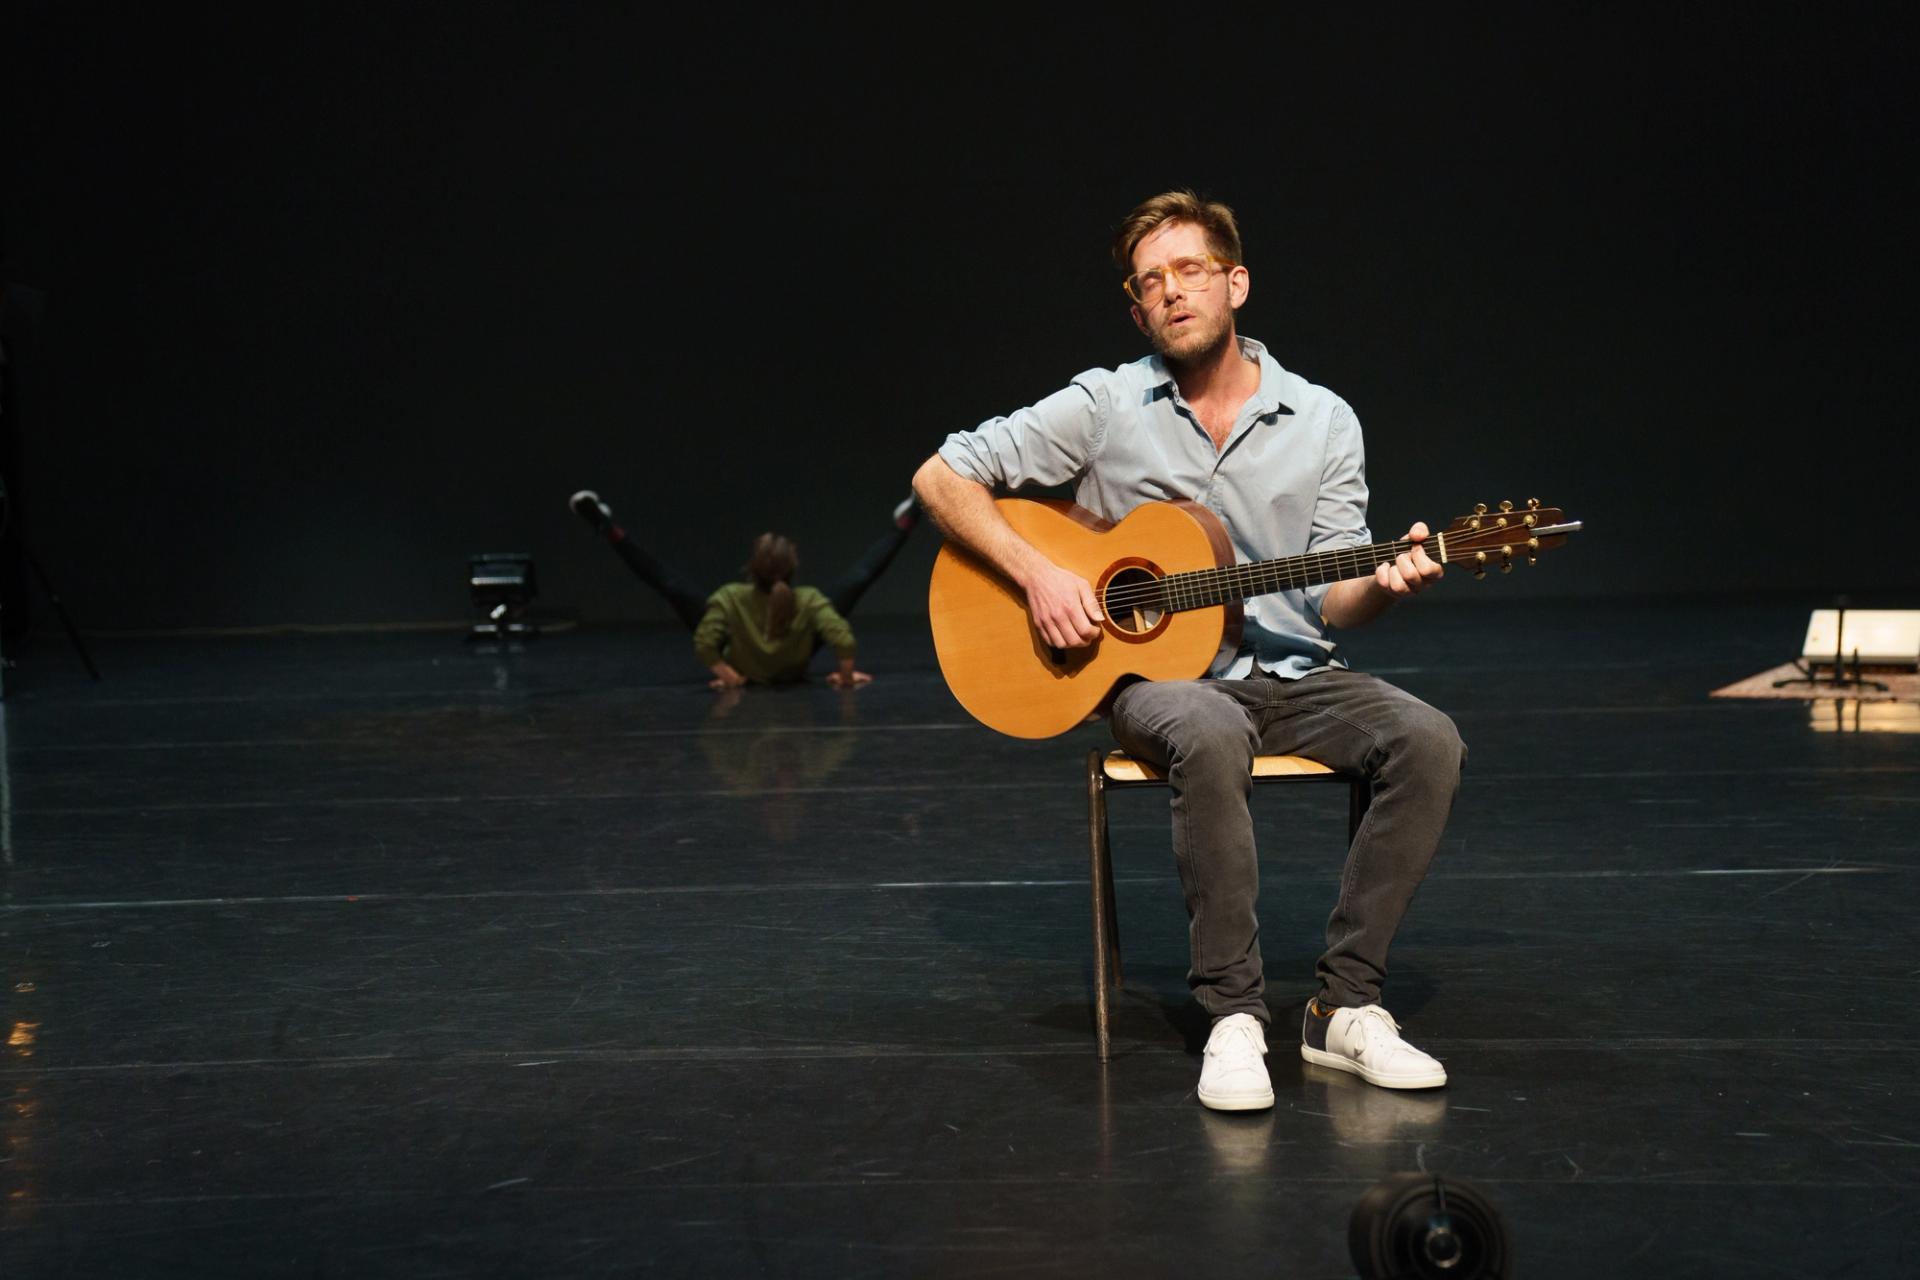 Lasse is in the foreground sitting on a chair, playing a song on the guitar. His eyes are closed and he is singing. In the backgroudn, Ingrid is in the middle of a dance. 